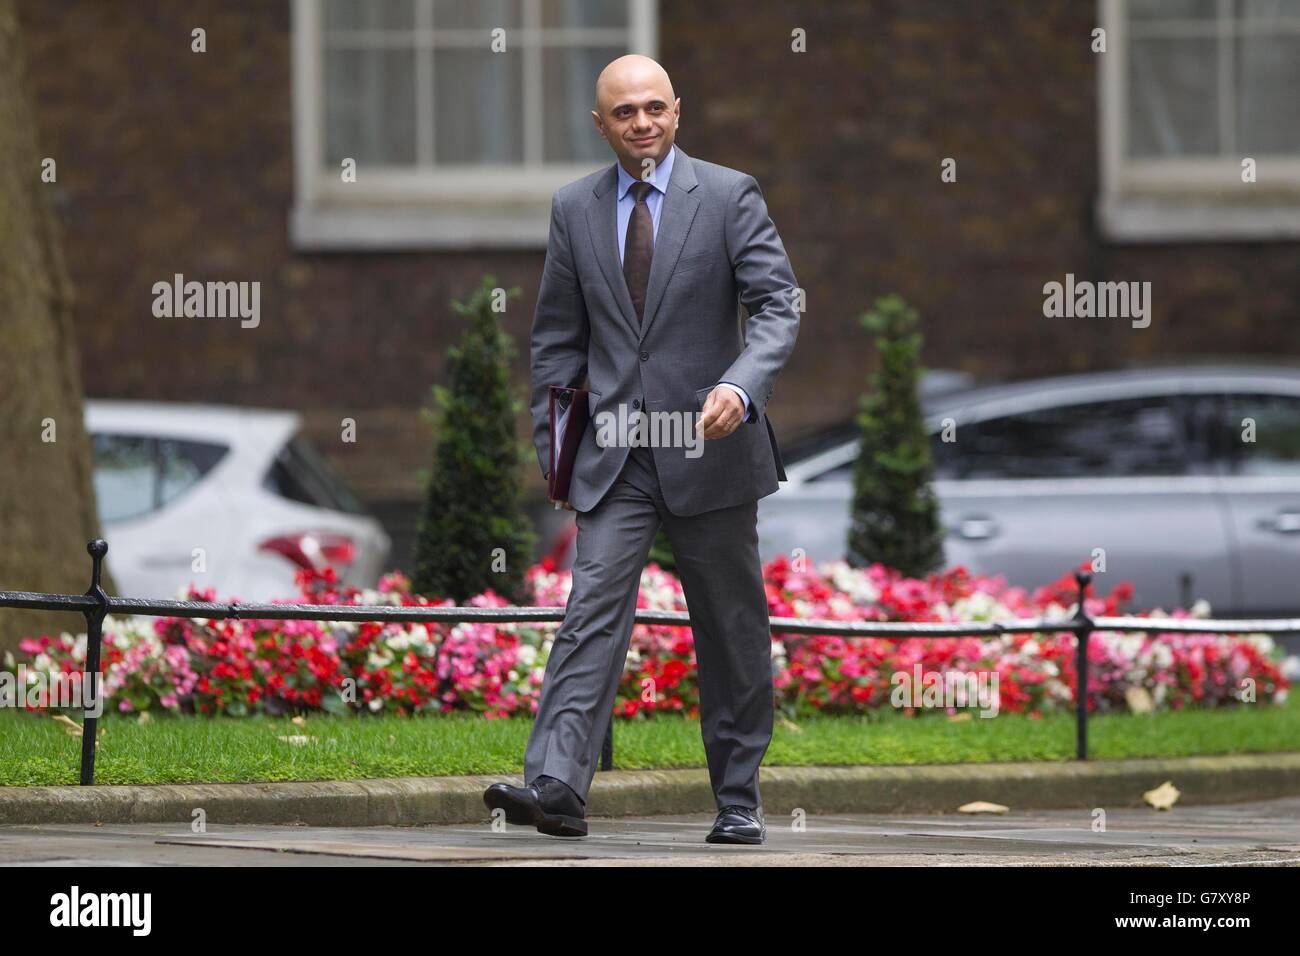 London, UK. 27th June, 2016. Sajid Javid, Secretary of State for Business, arrives for the Conservative Party EU emergency Cabinet Meeting in Downing Street, London, UK Credit:  Jeff Gilbert/Alamy Live News Stock Photo